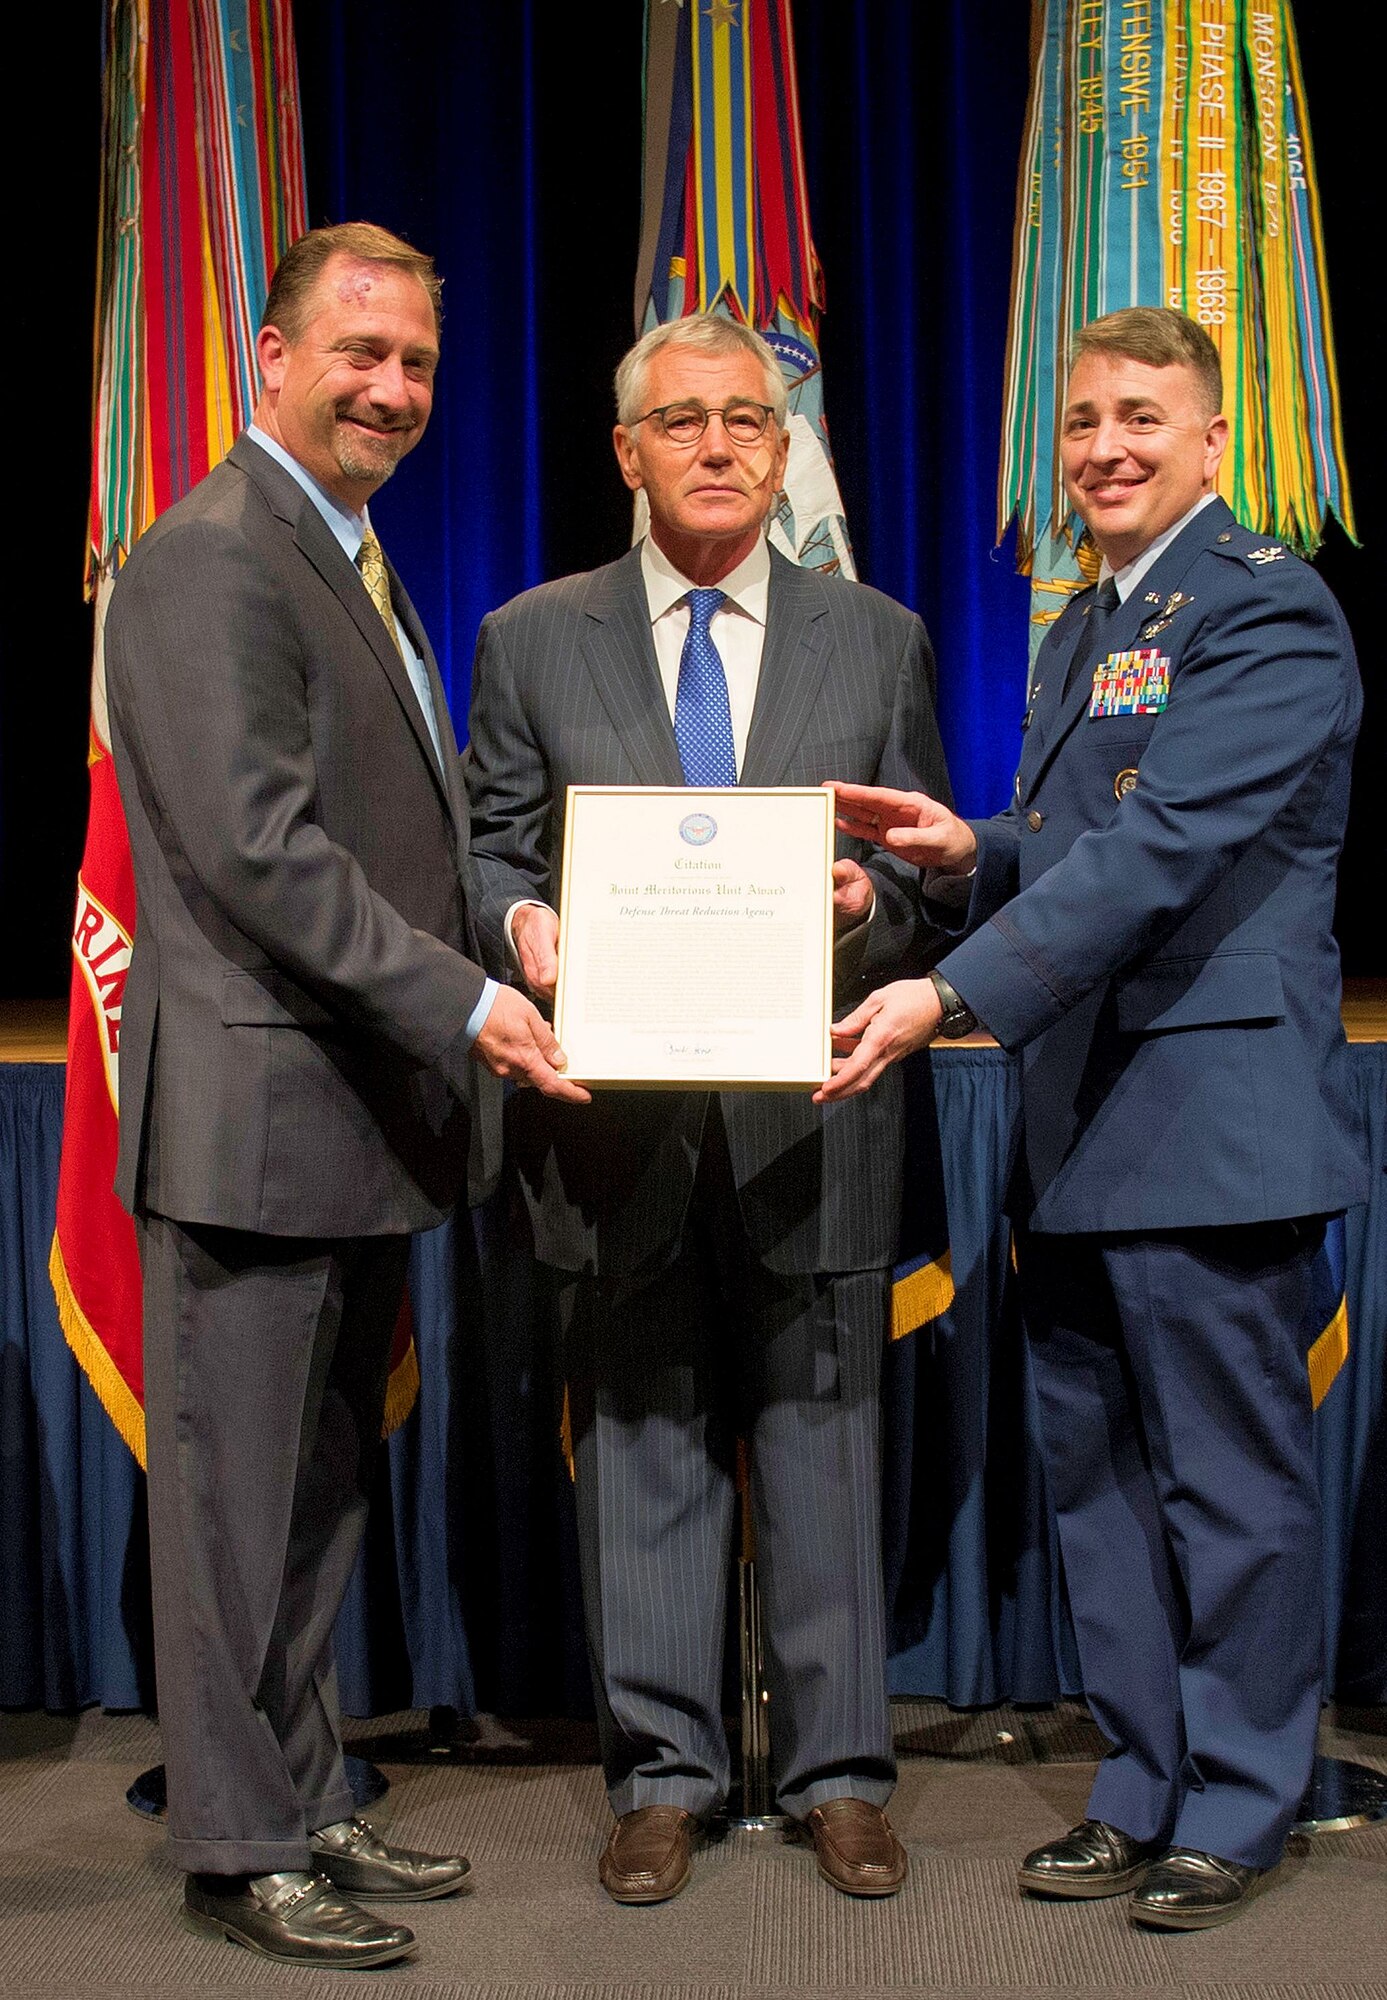 Col. John Cinnamon (right), the 71st Operations Group commander, and Ken Myers (left), the Defense Threat Reduction Agency director, accept a Joint Meritorious Unit Award from Secretary of Defense Chuck Hagel, during a ceremony at the Pentagon Nov. 12. Cinnamon was the chief of plans for DTRA from June 2012 to June 2014 before he joined Team Vance.  (U.S. Air Force photo/MSgt. Adrian Cadiz)